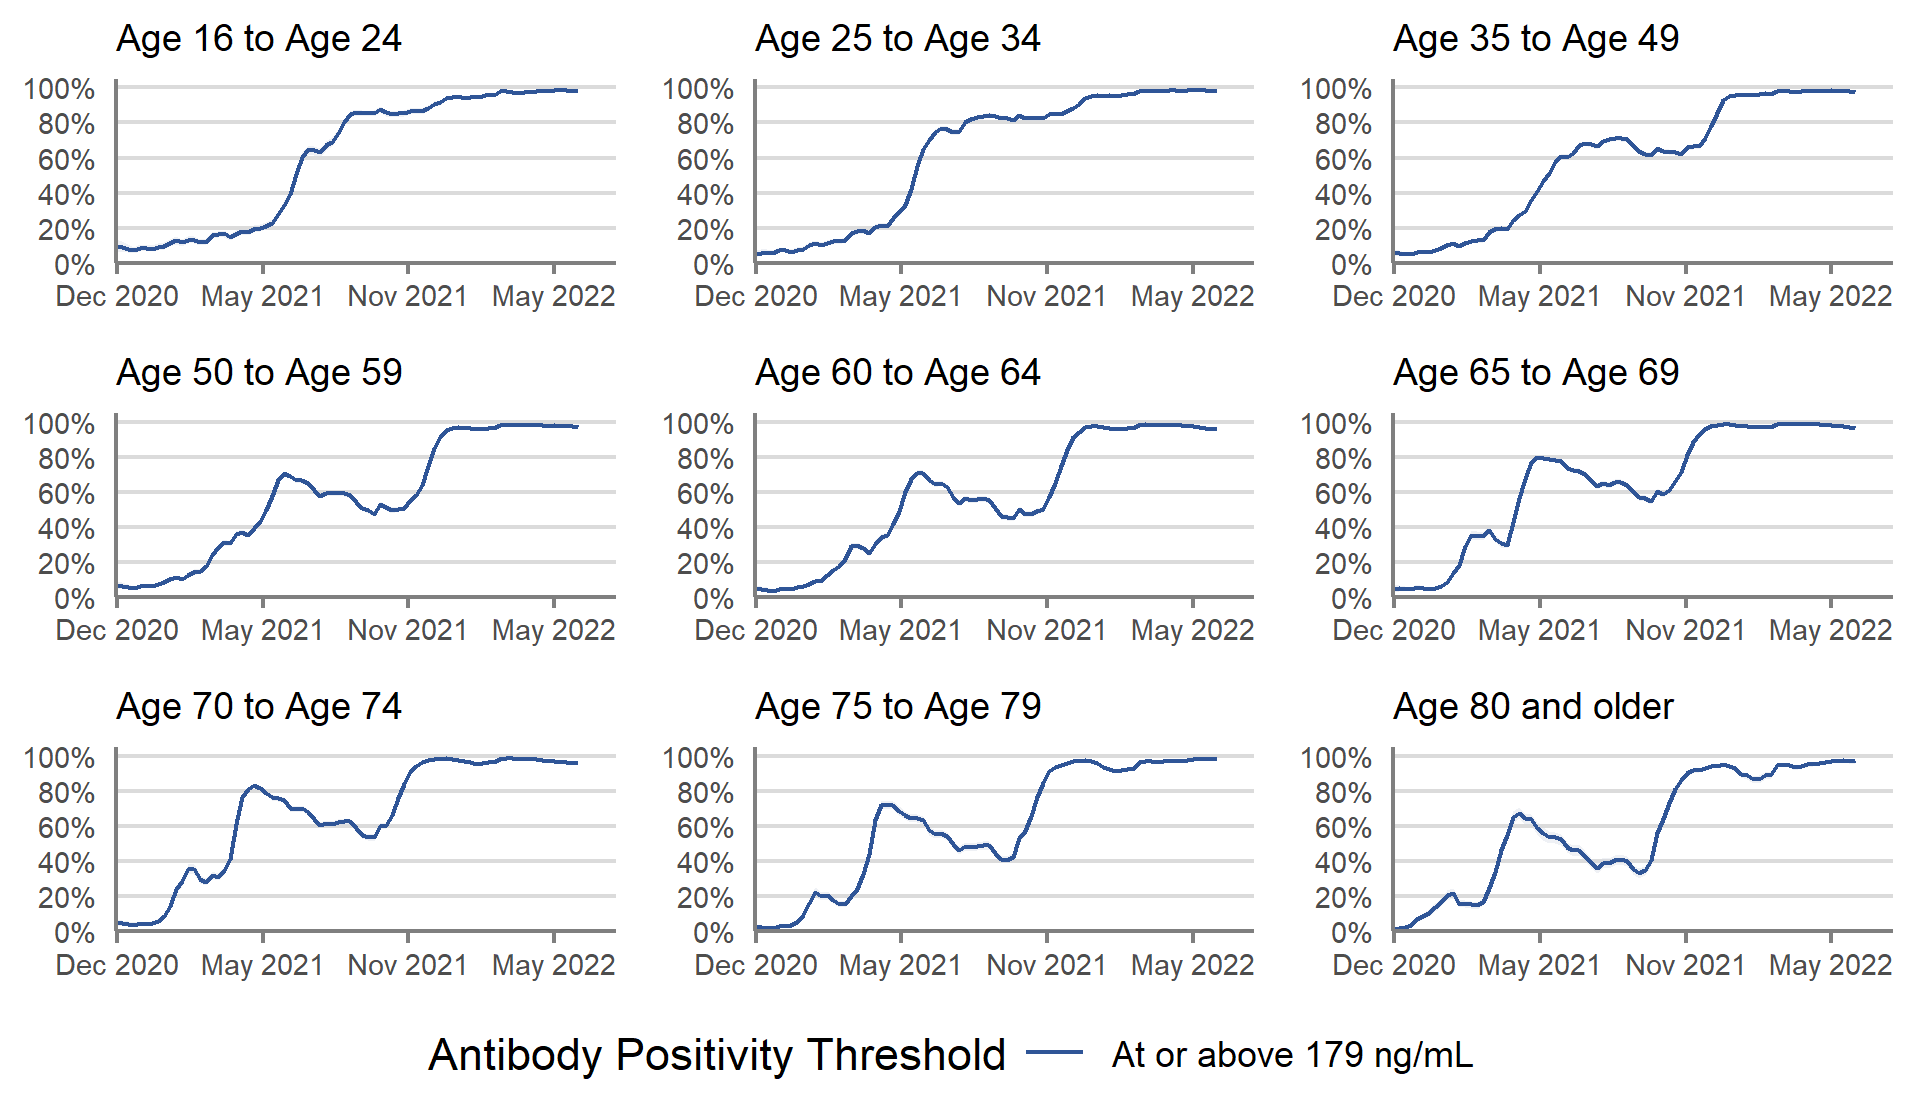 In recent weeks, antibody positivity at the 179 ng/mL level has continued to remain high across all adult age groups in Scotland.